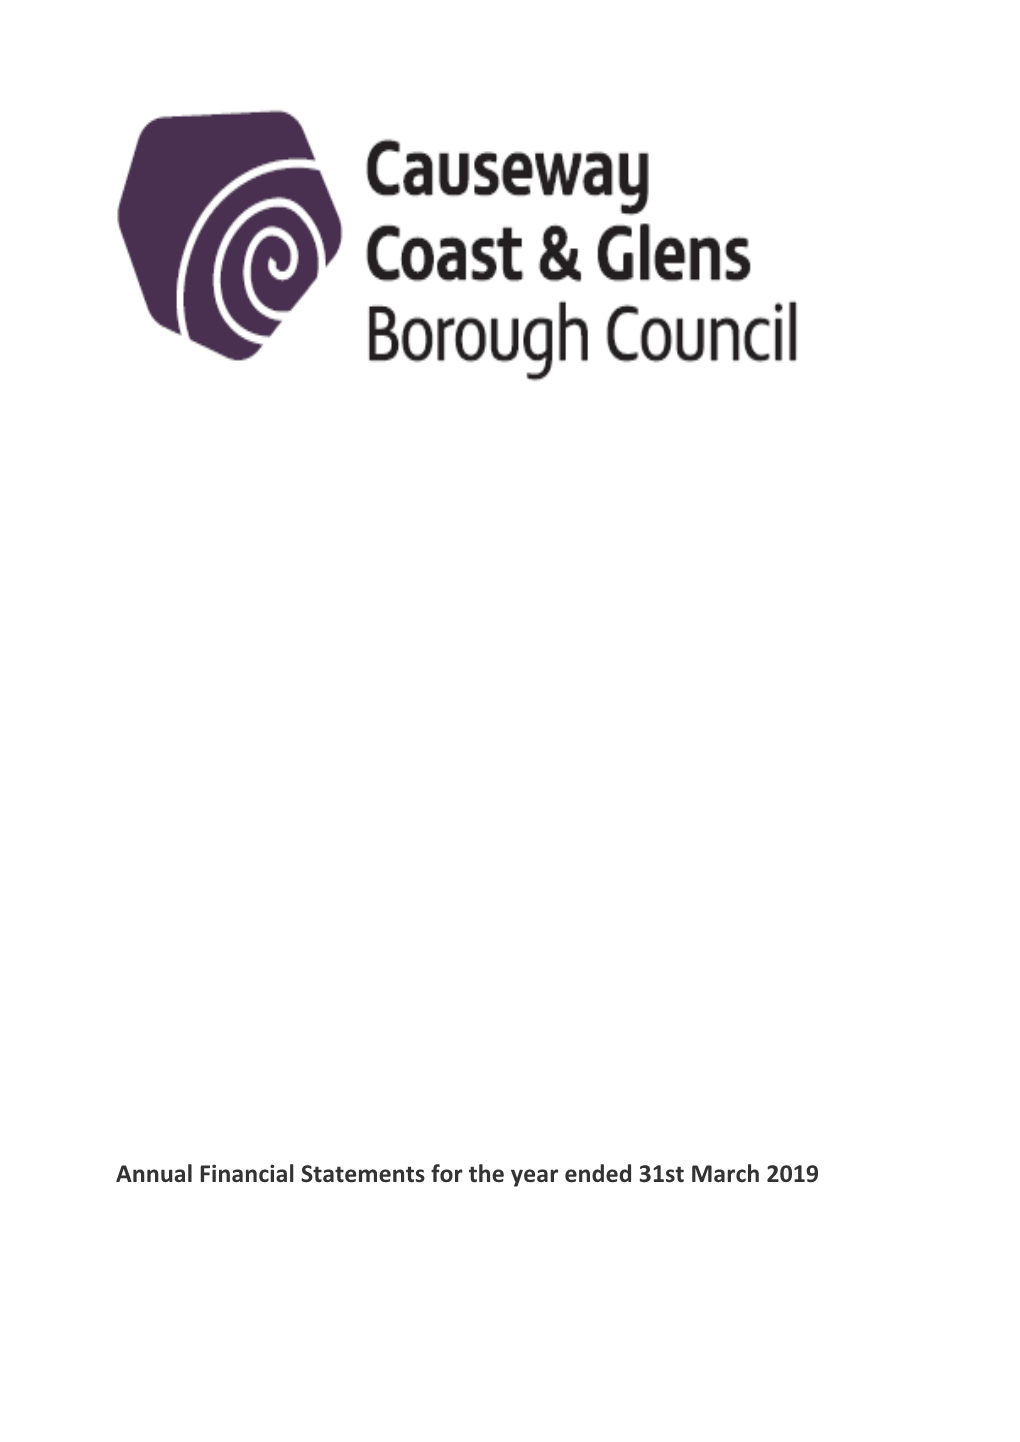 Annual Financial Statements for the Year Ended 31St March 2019 Causeway Coast and Glens Borough Council Year Ended 31 March 2019